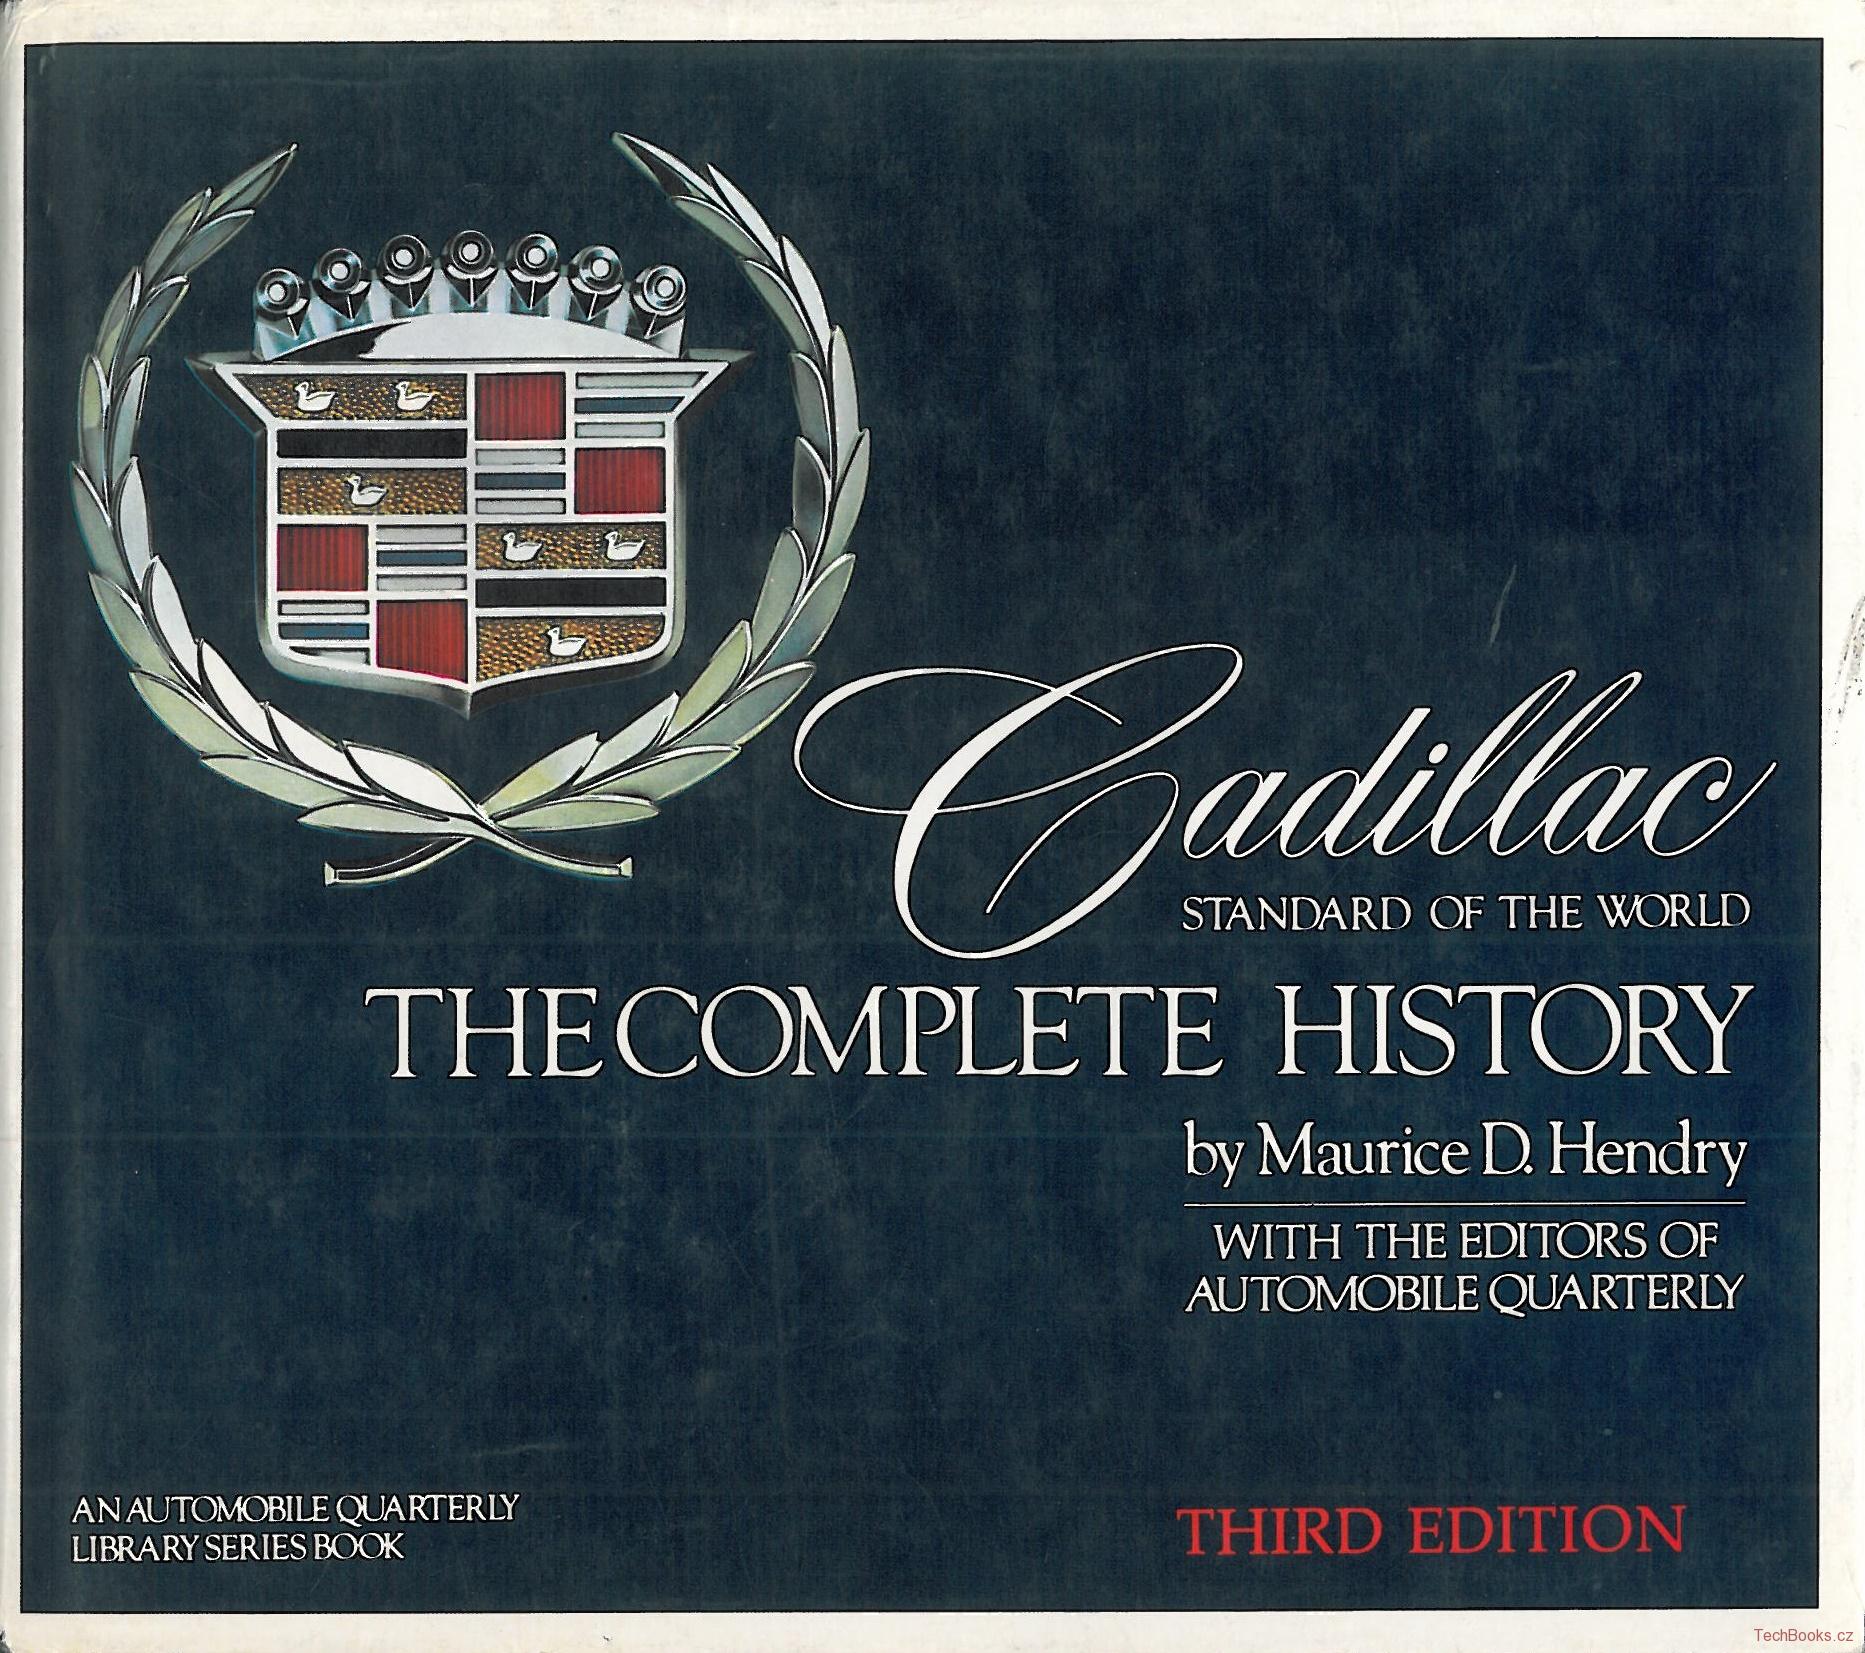 Cadillac: Standard of the World (Third Edition)